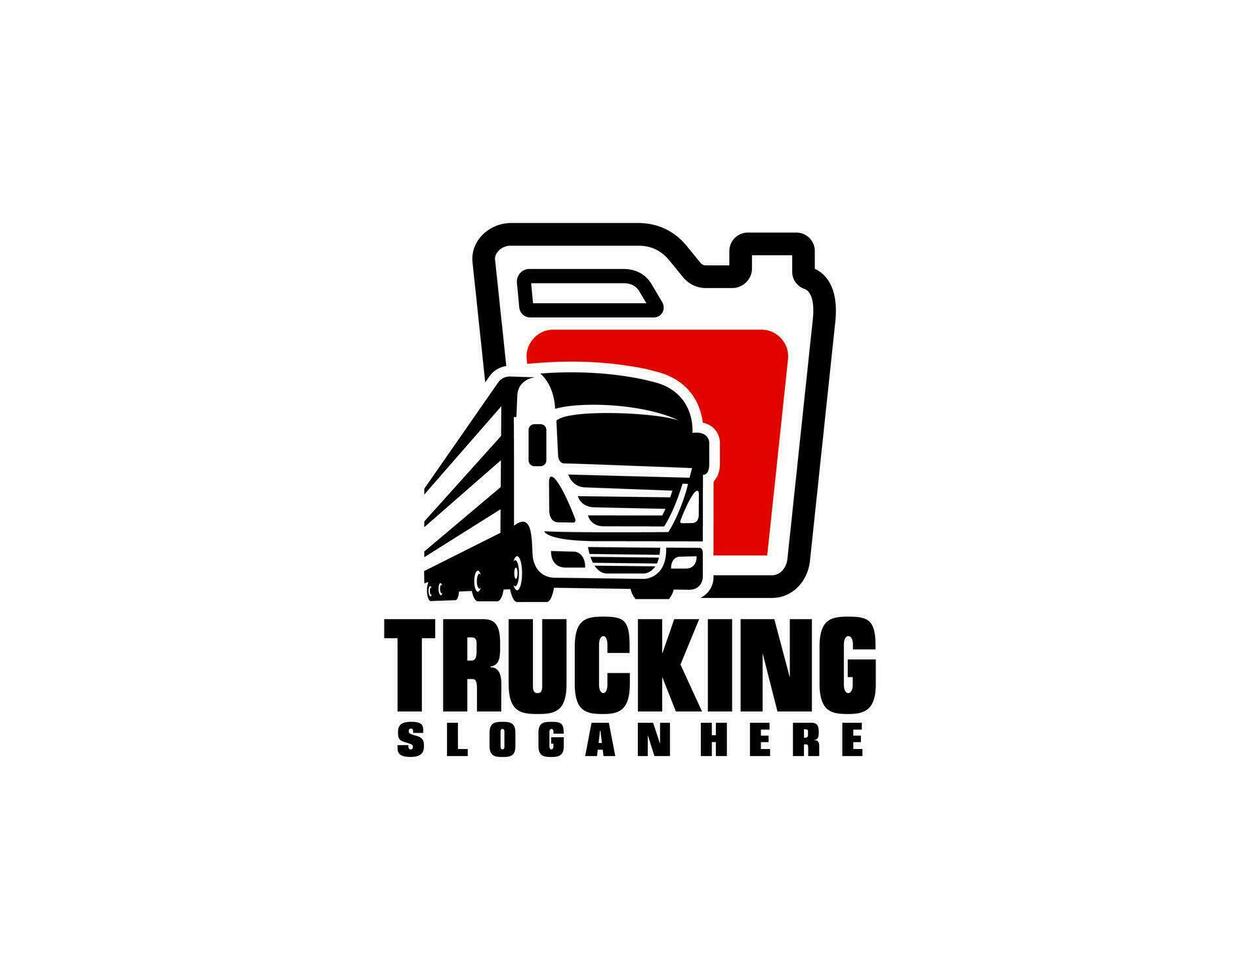 Logo truck and trailer. vector